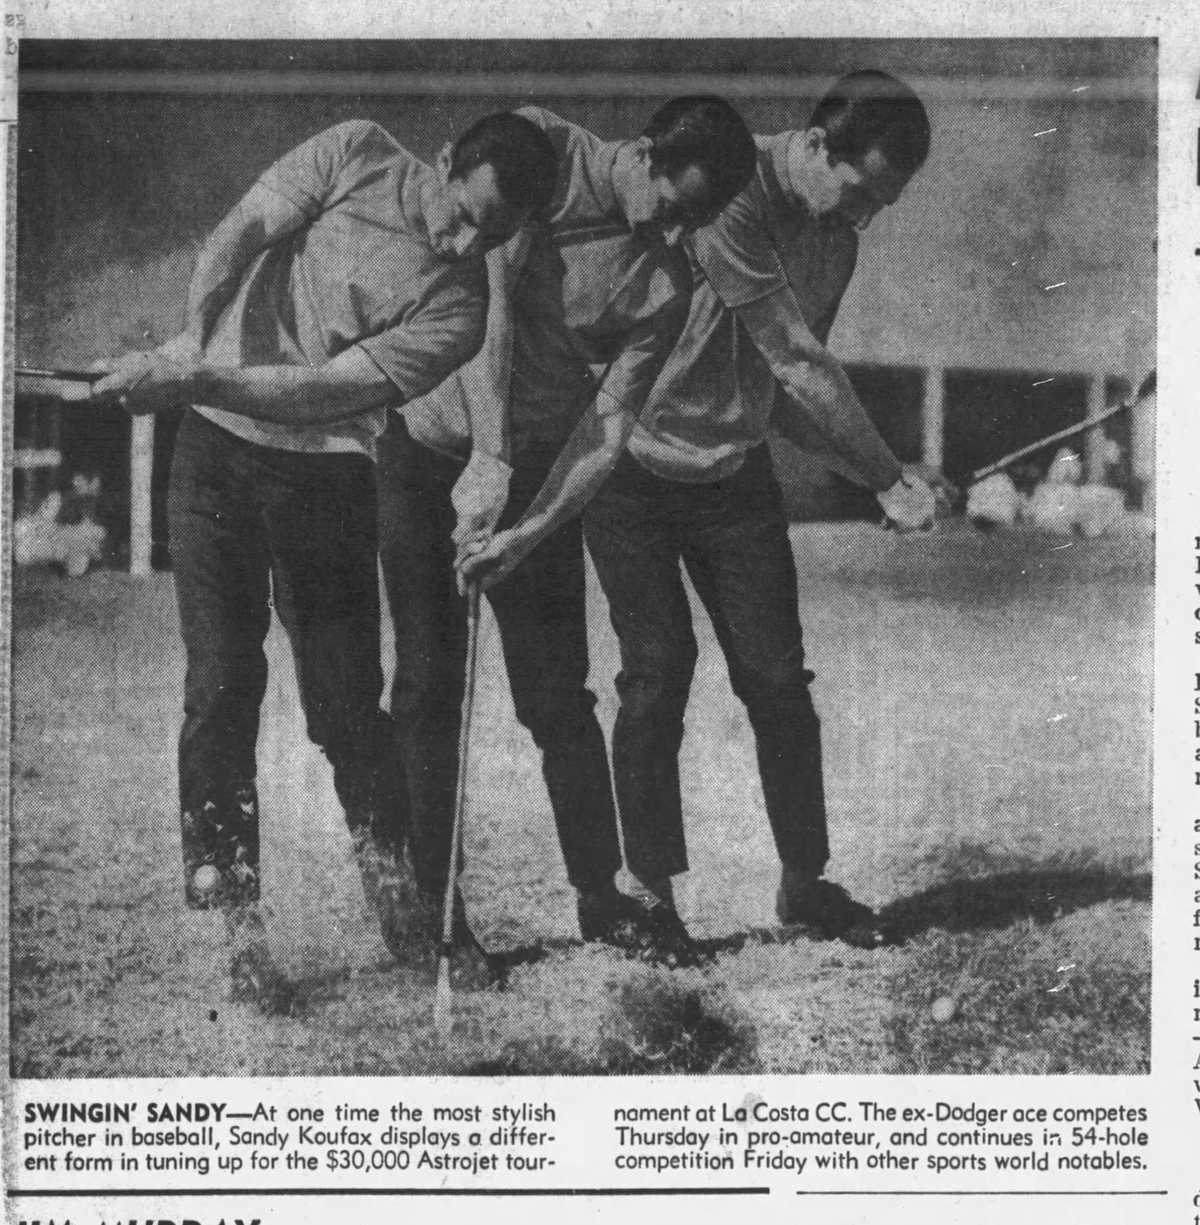 A newspaper photograph of a man in three different golf swing positions